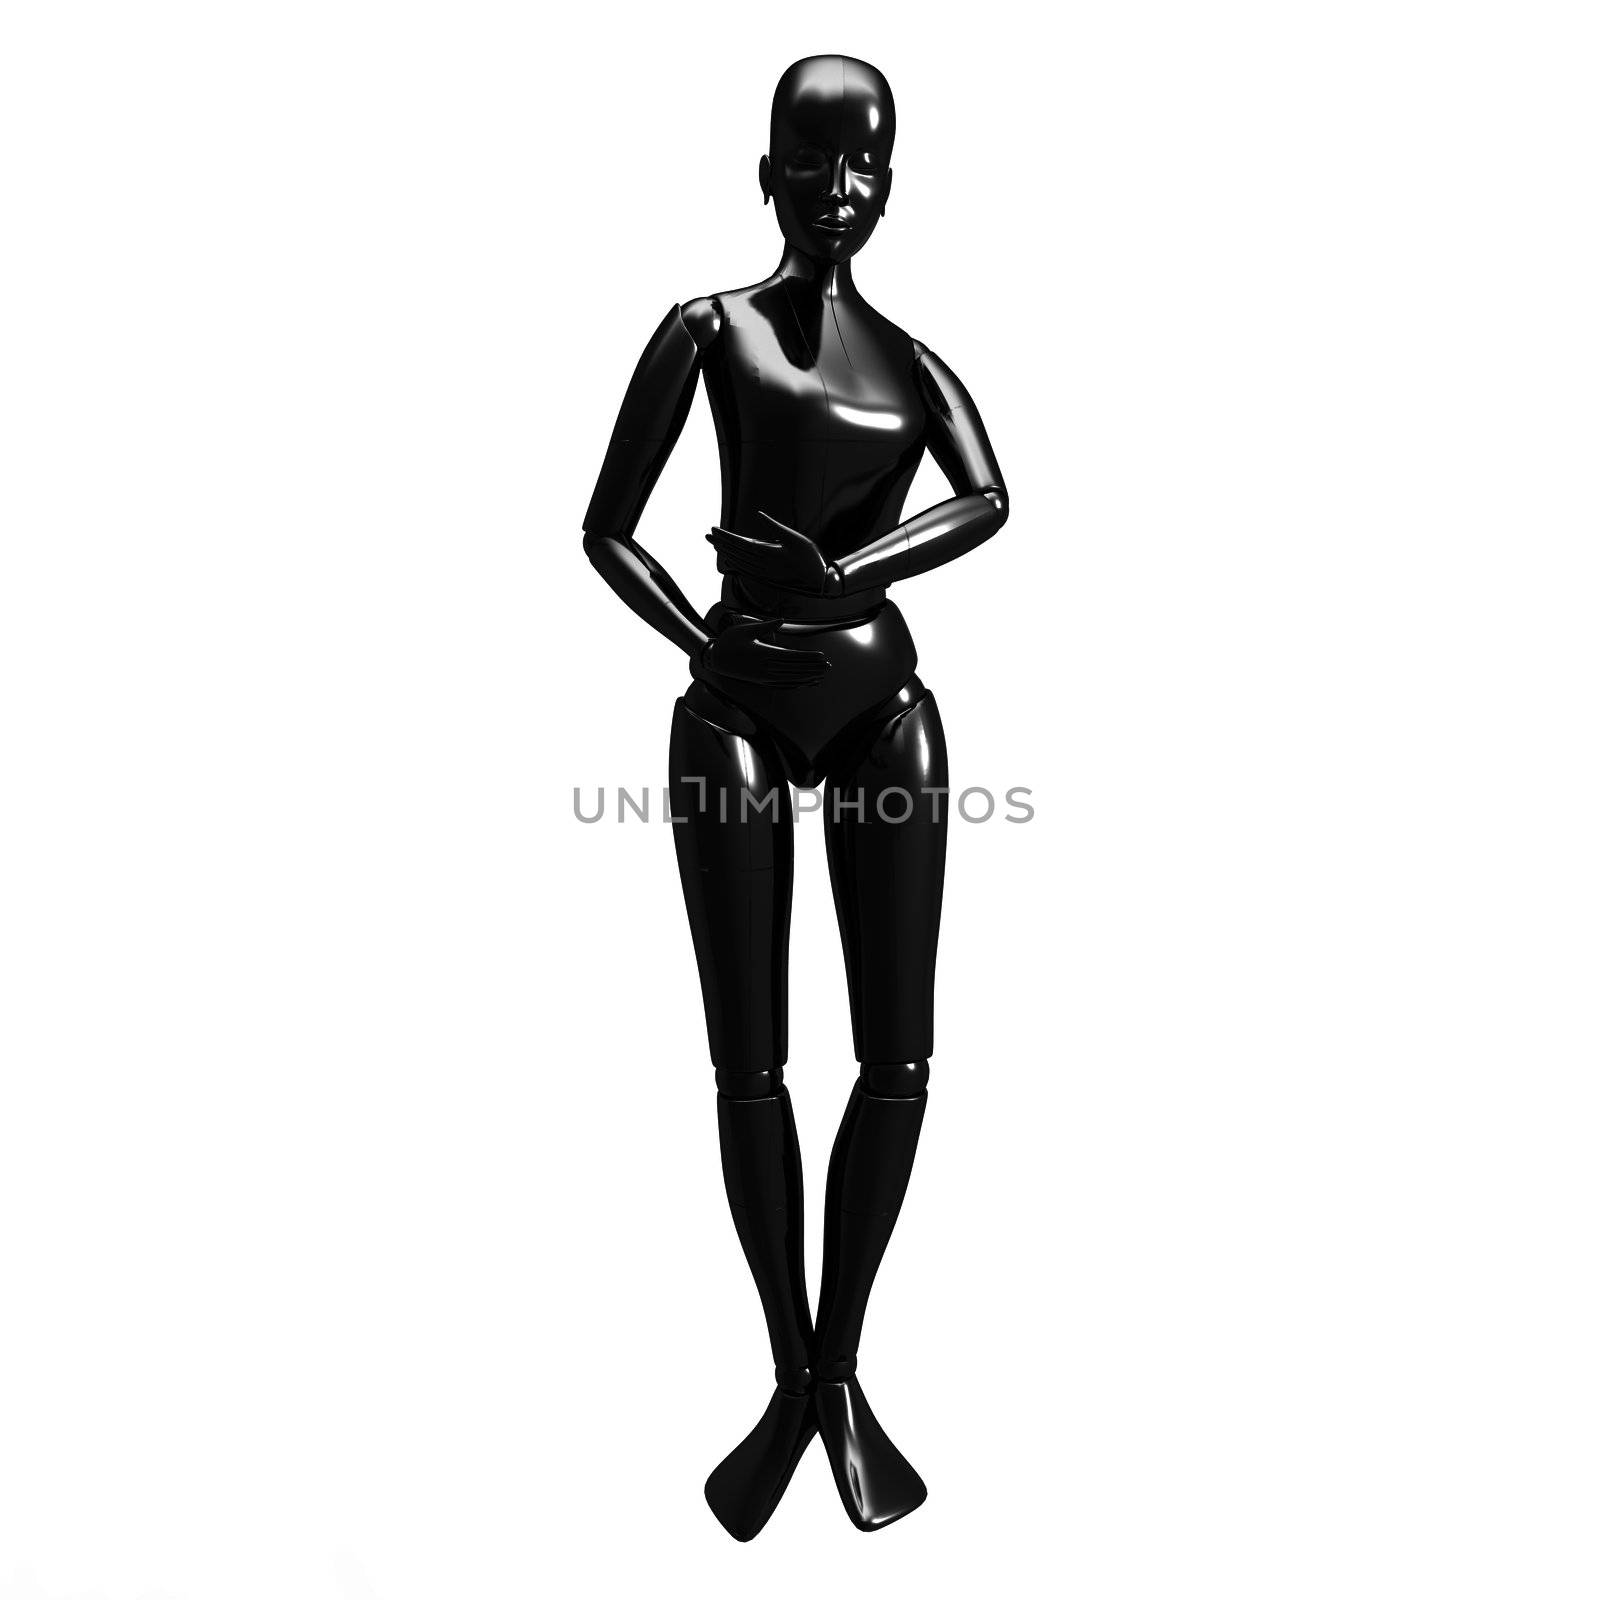  female mannequin isolated on white background